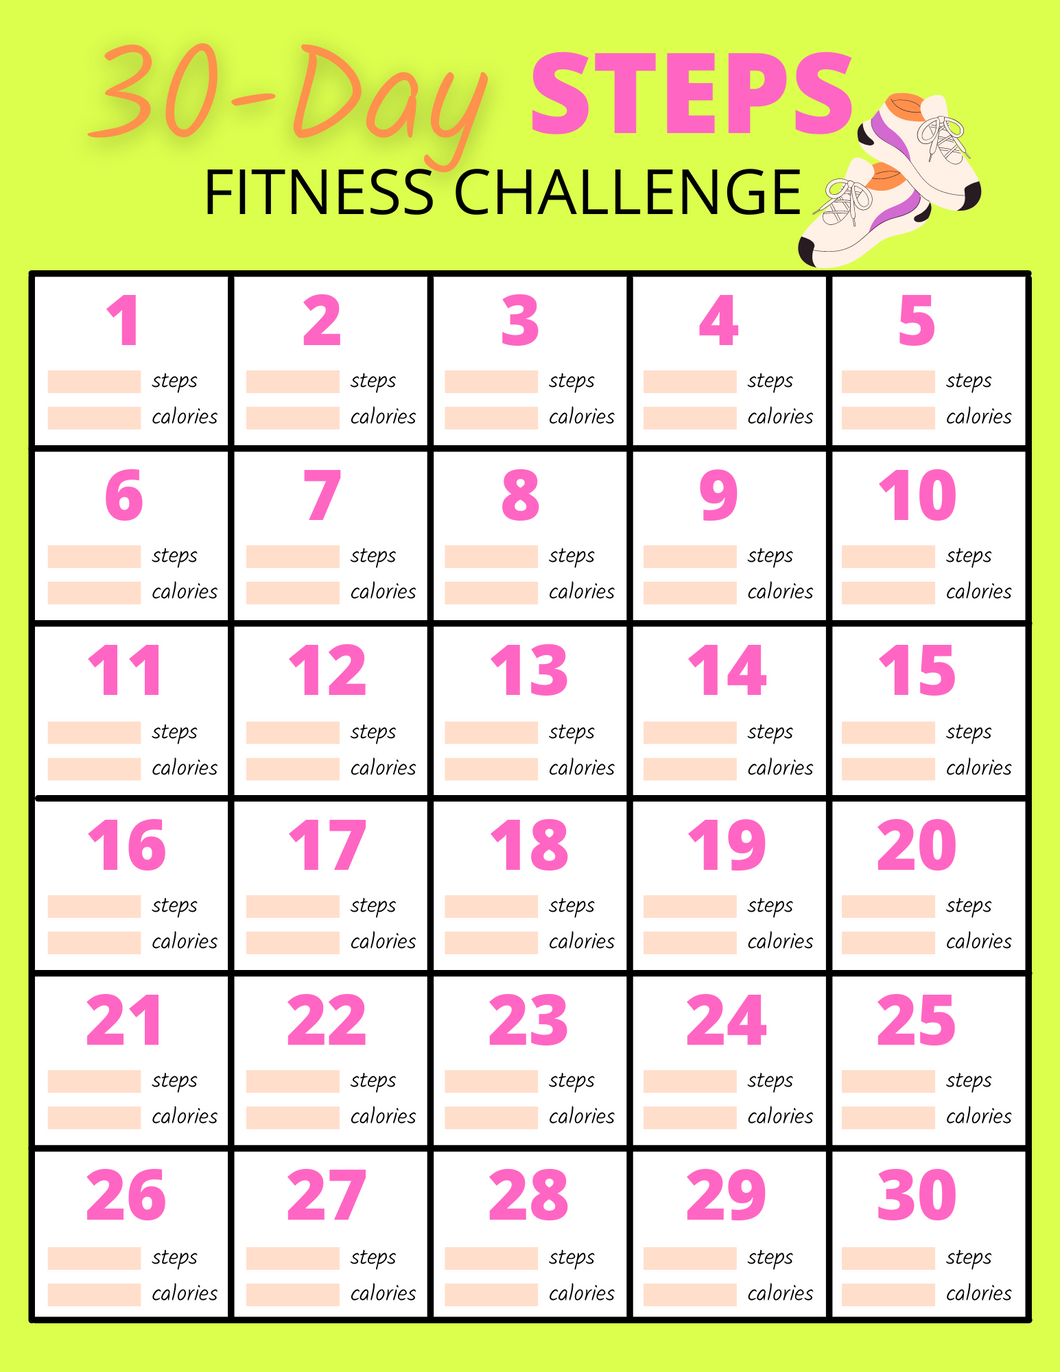 A square box with numbers and shoes on it - The 30 Day Steps Fitness Challenge by Wondermom Printables.